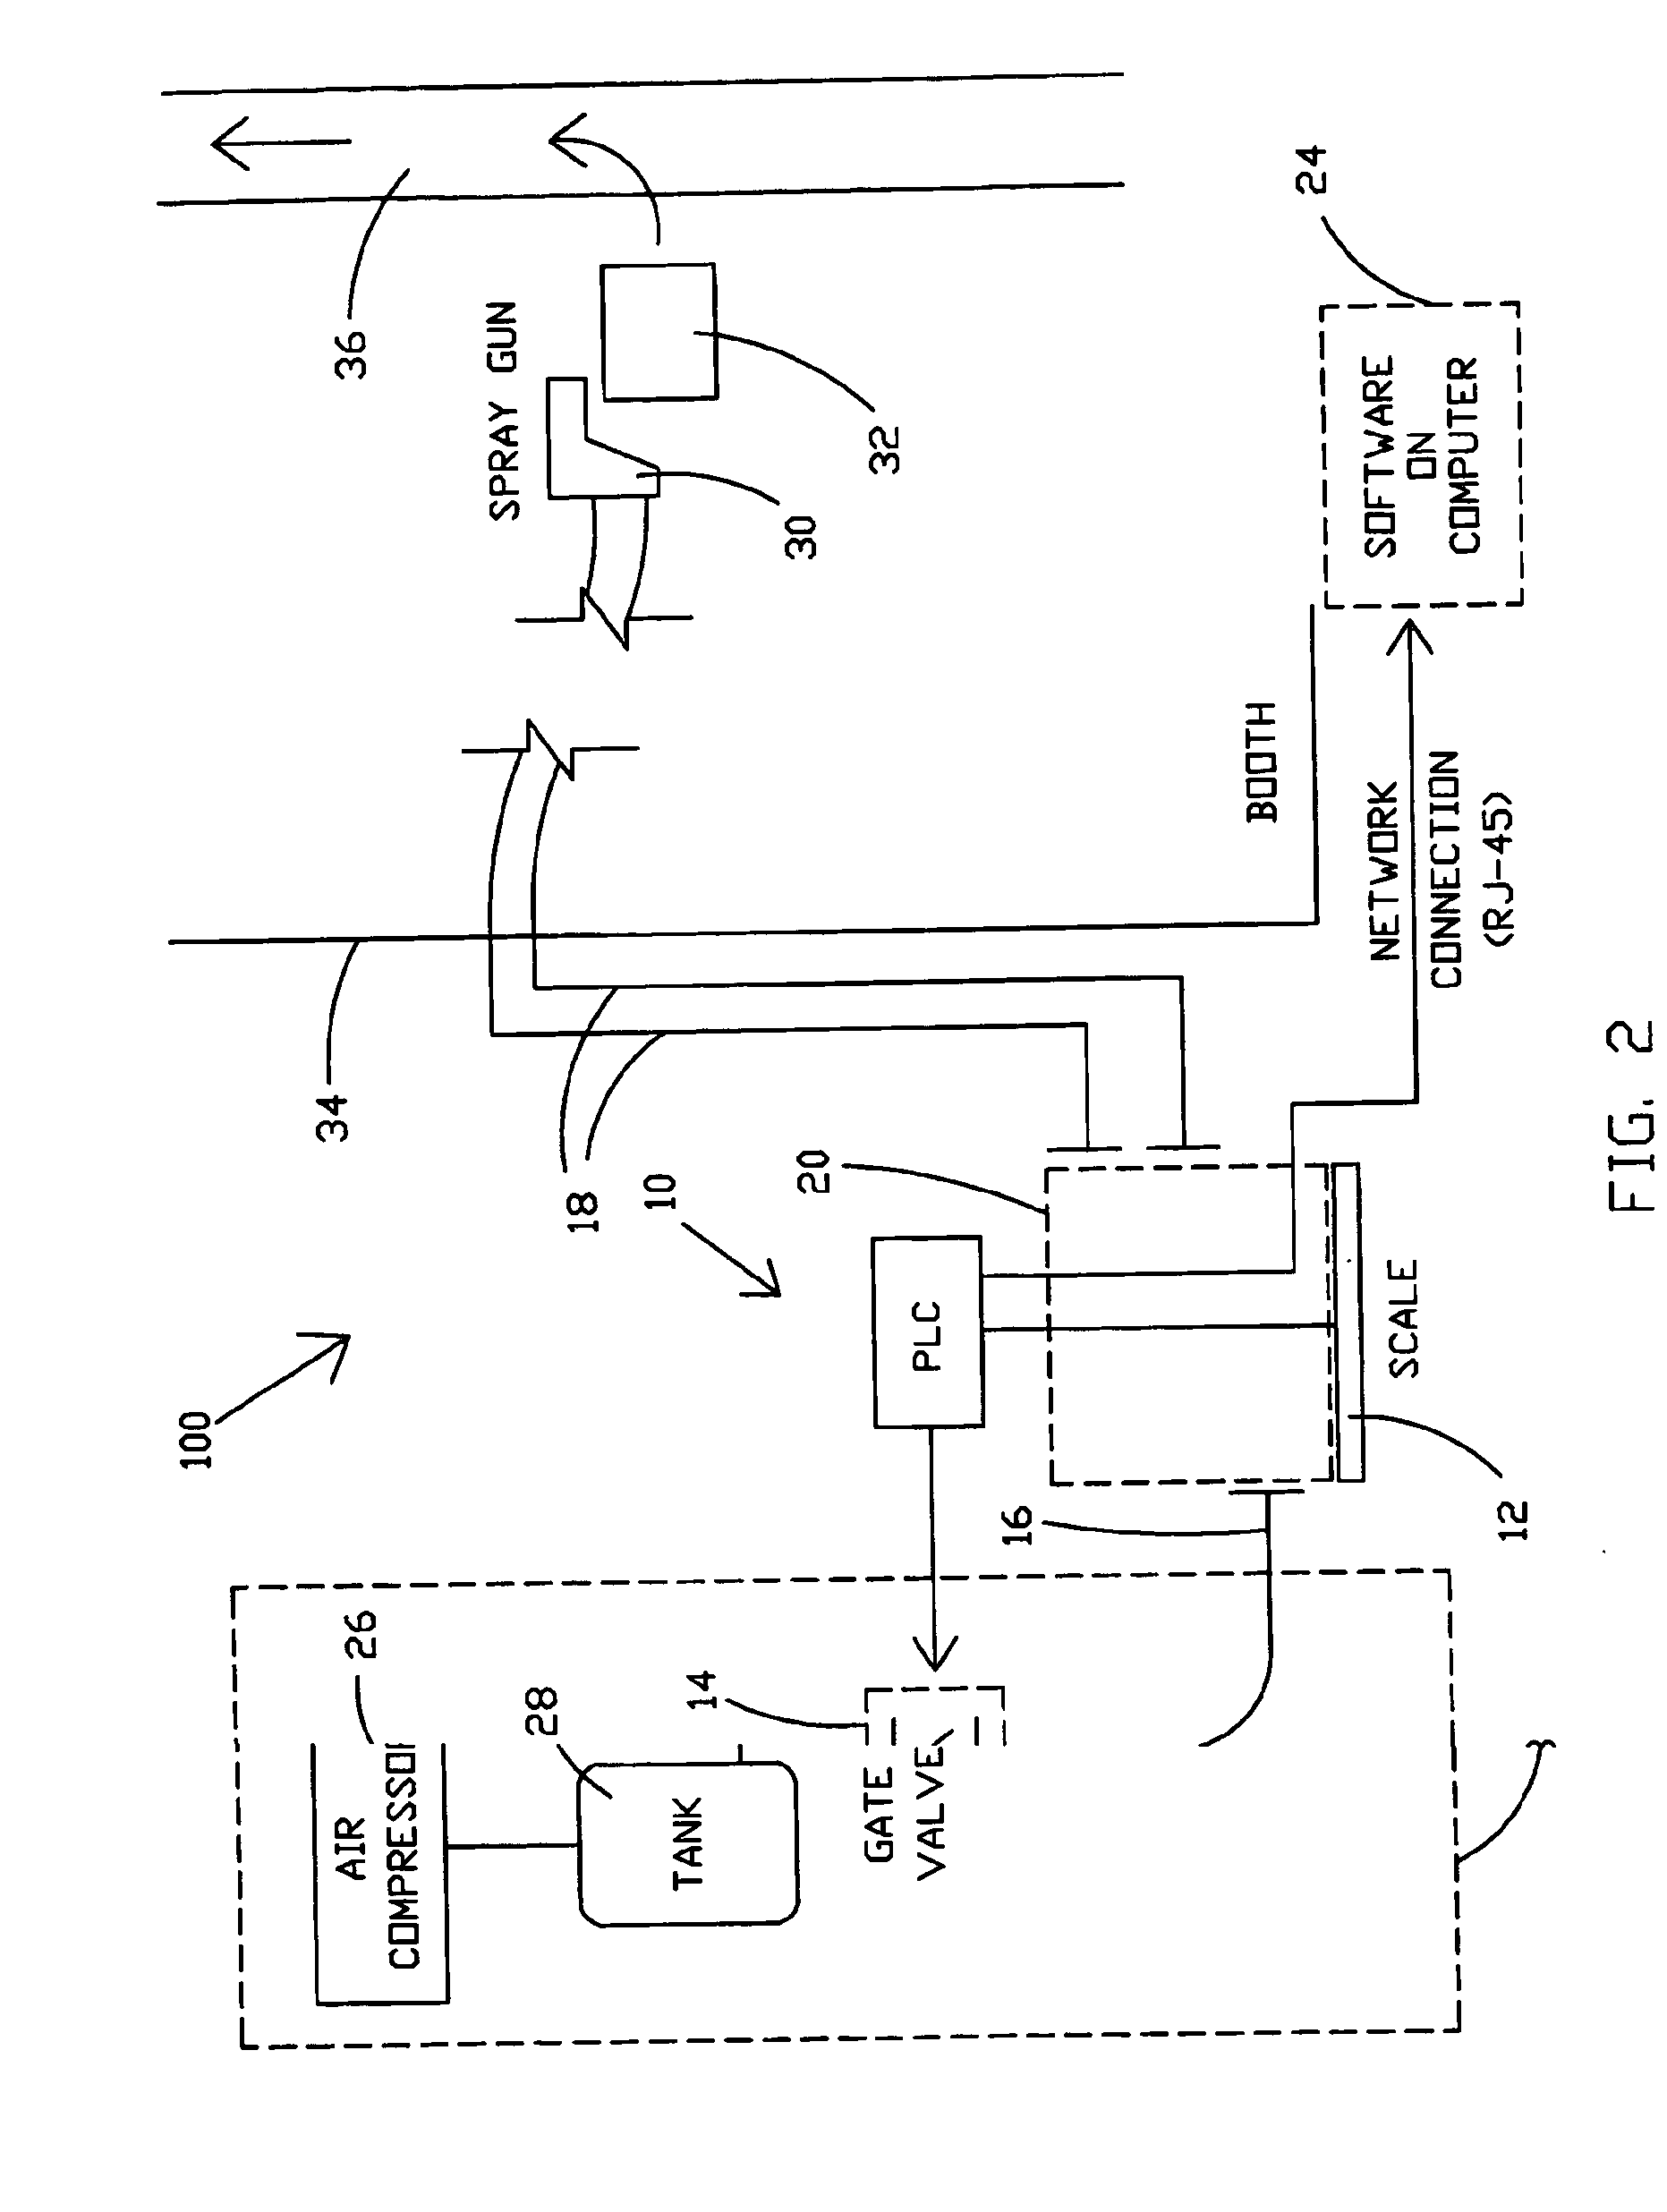 Coating operation pollutant emission measurement and recording system and method